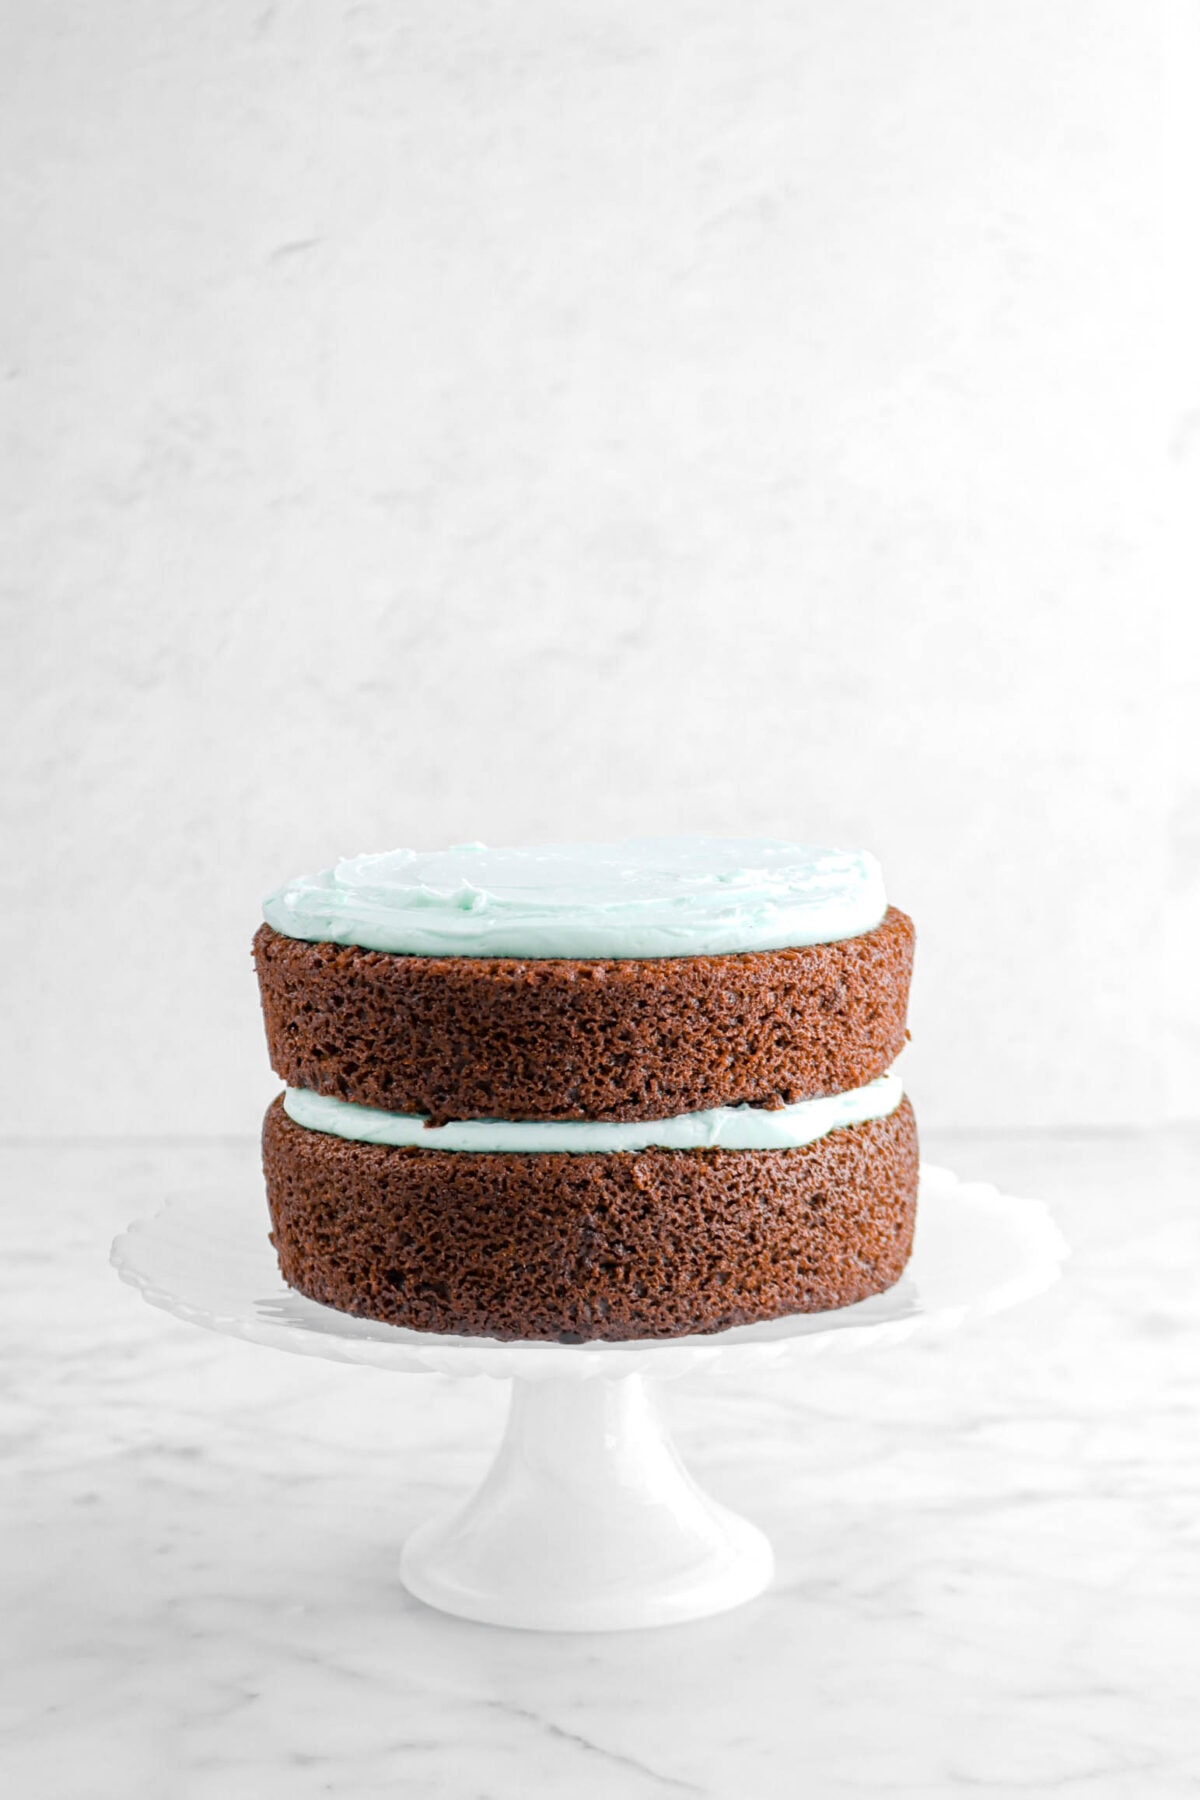 frosting spread onto second cake layer